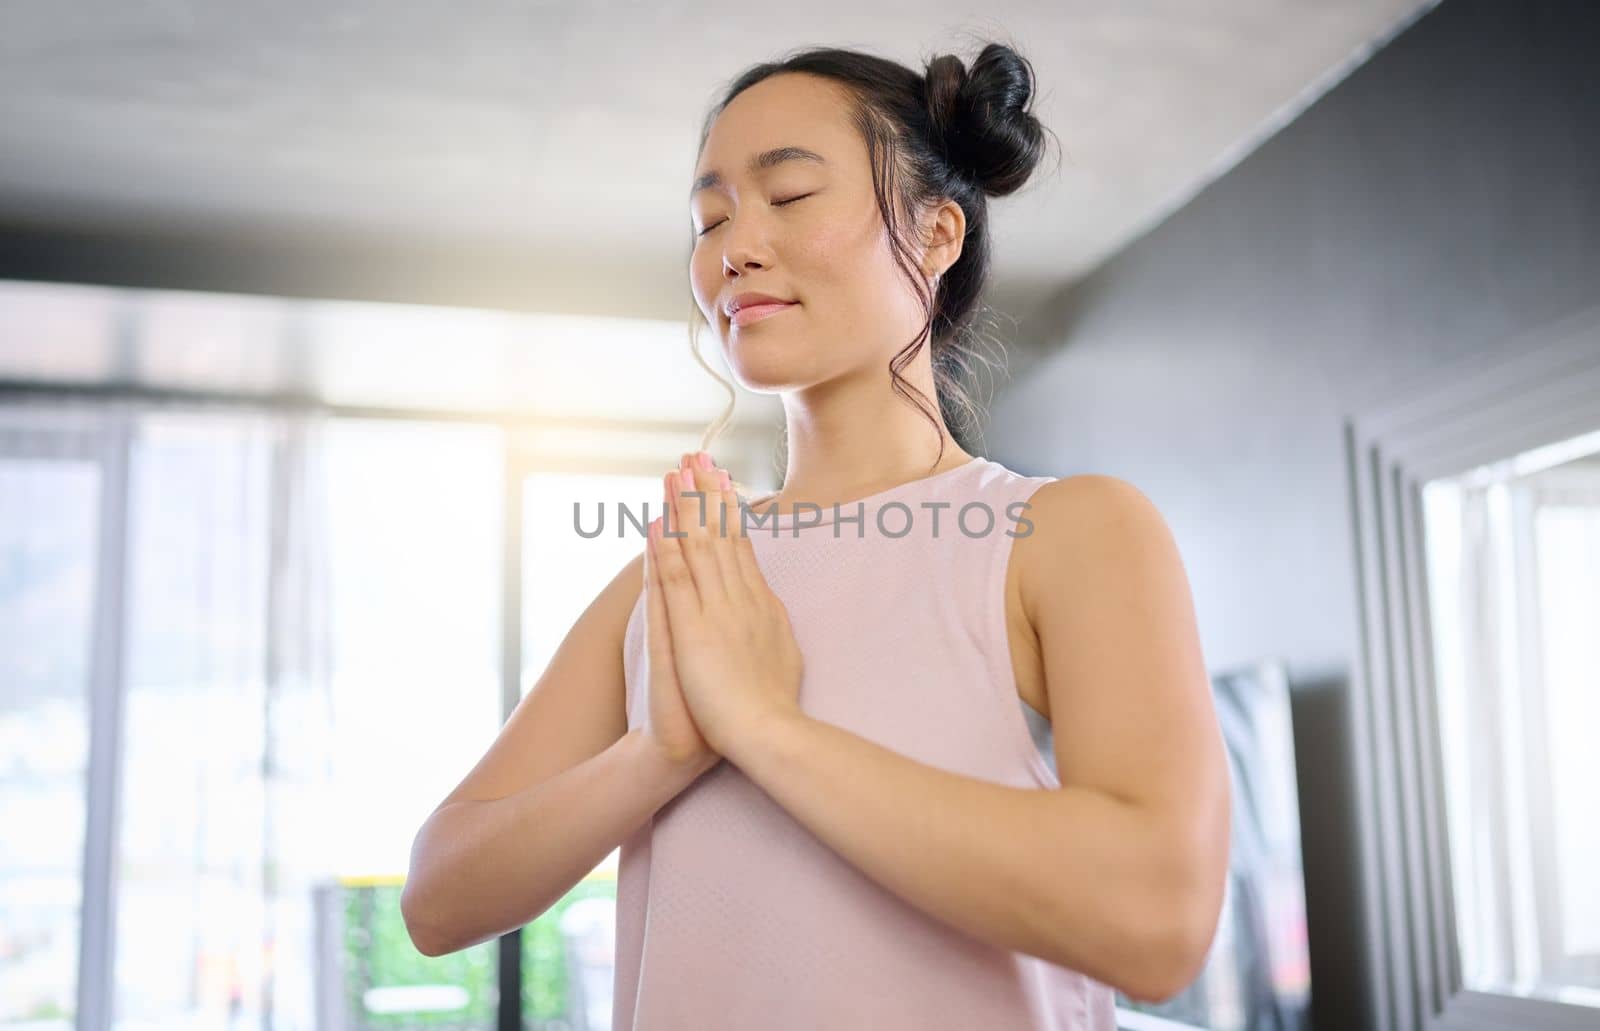 Yoga, meditation and praying woman training her mind for peace, zen and calm start to the morning. Hope, freedom and Asian girl in the living room for a mindset exercise, spiritual and mindfulness.